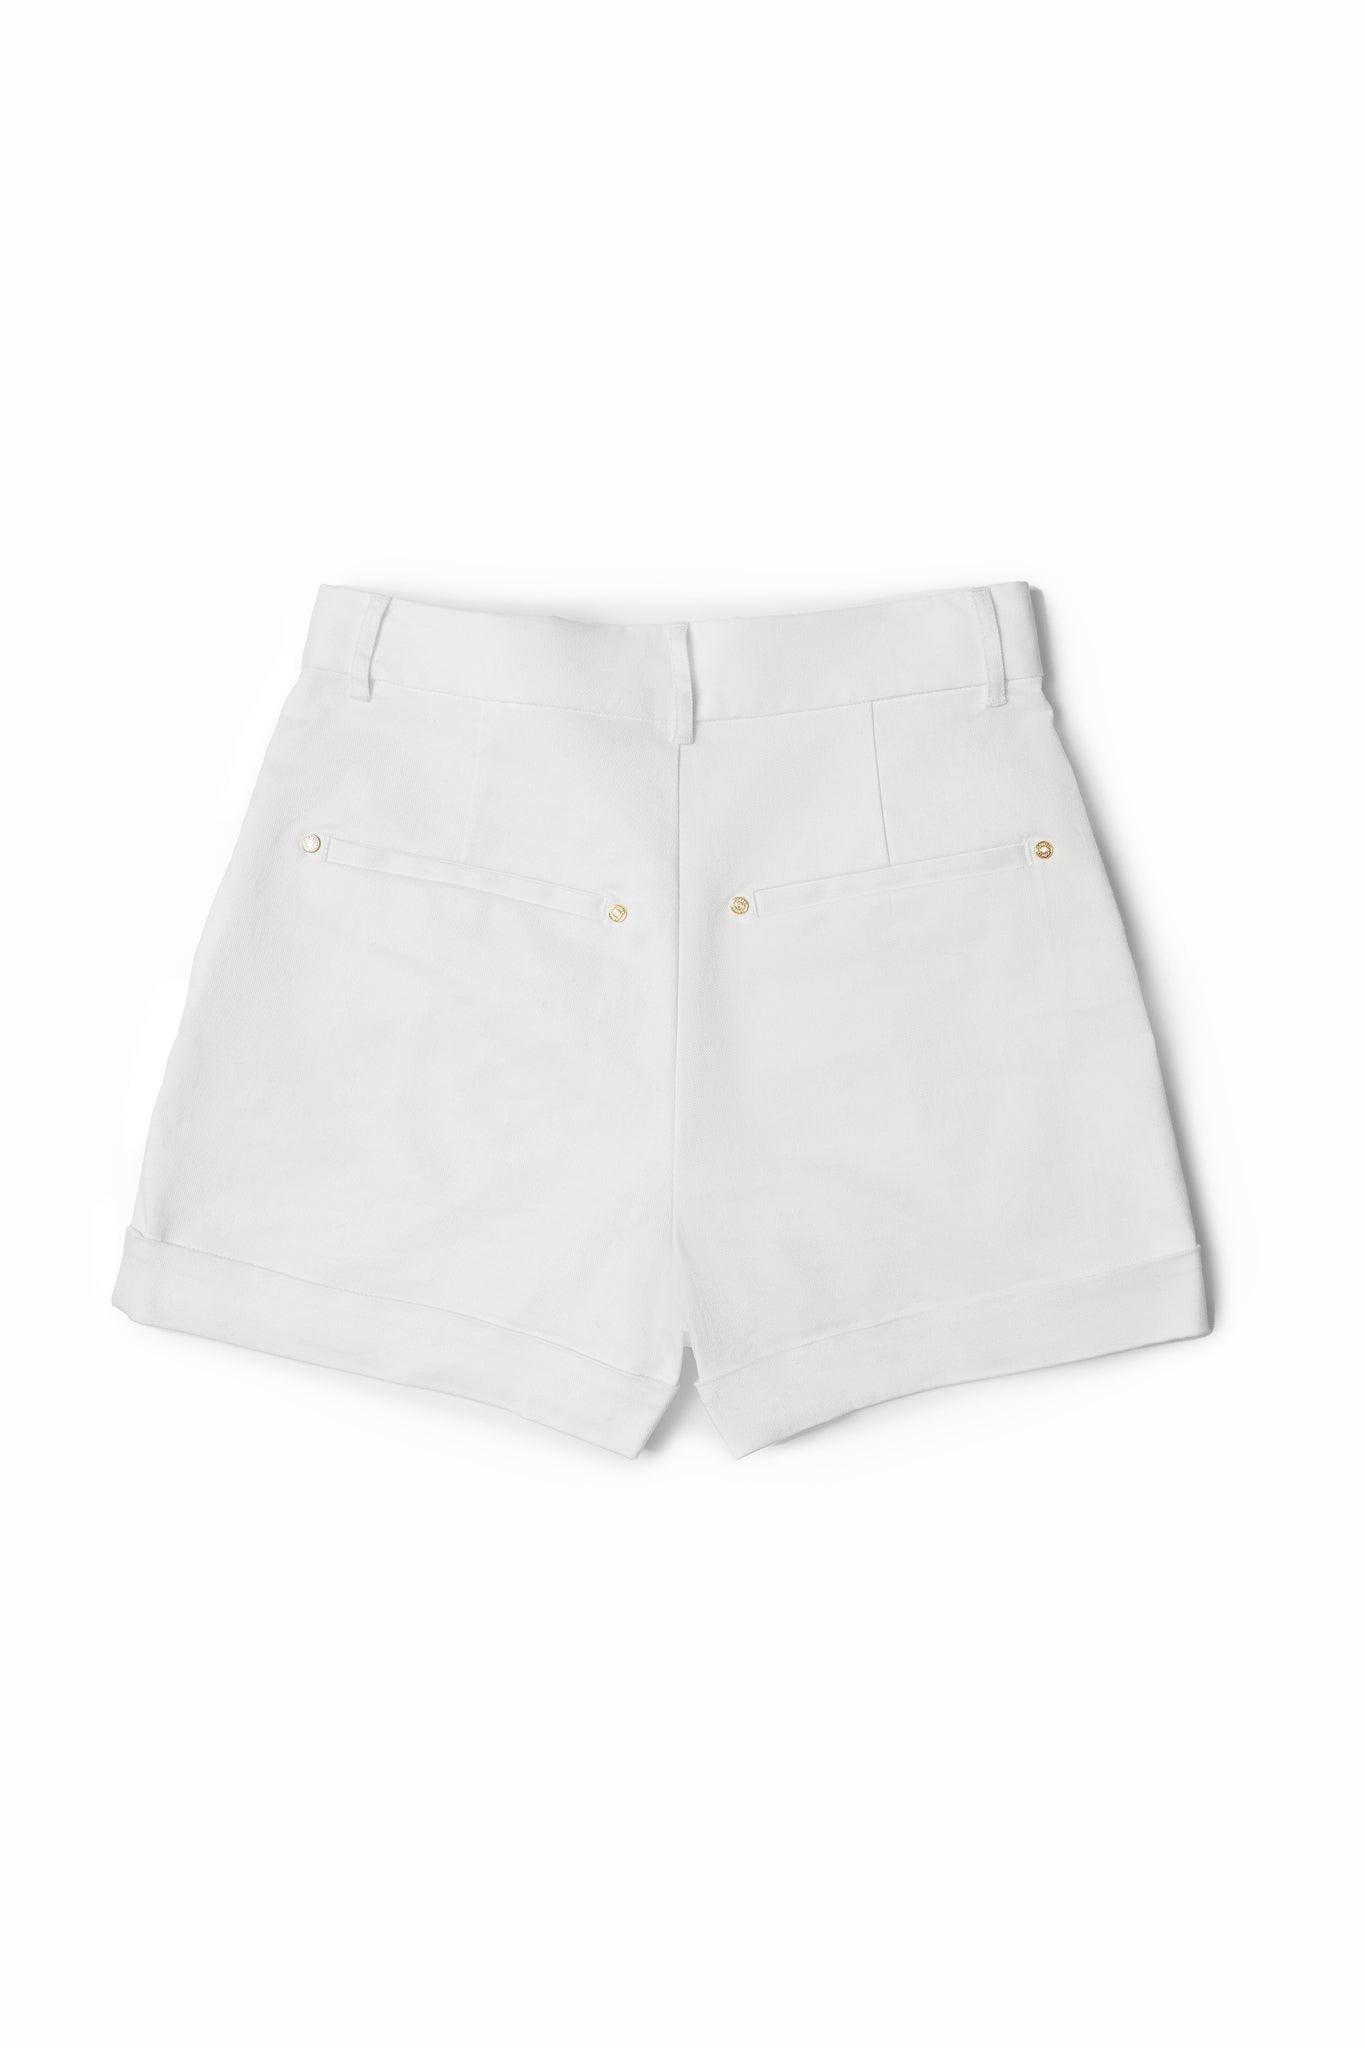 back of womens white high rise tailored shorts with decorative gold rivets that follow the pocket line in a sailor style with a turned up hem